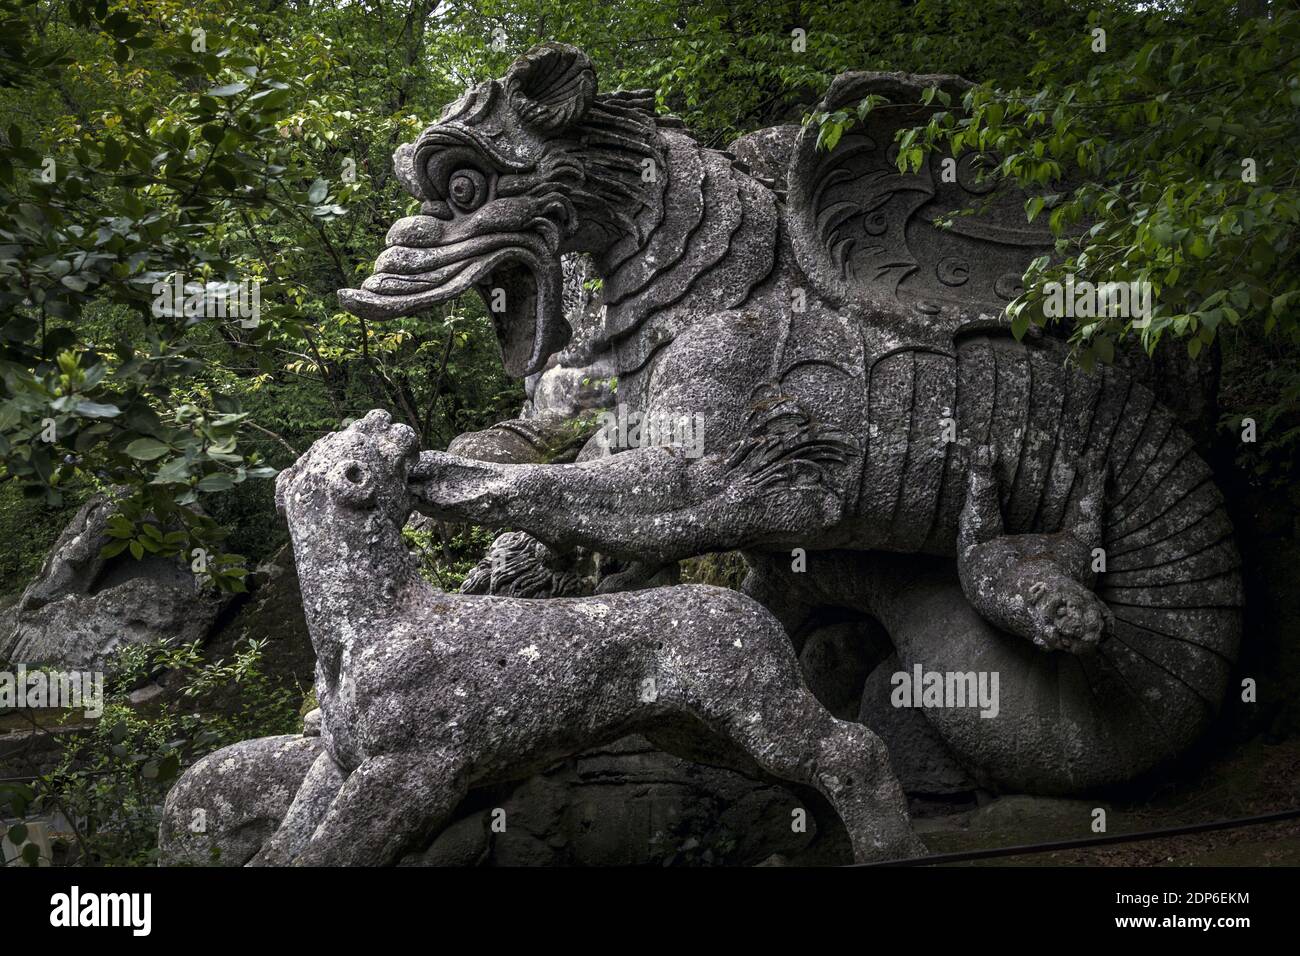 The large statue of the Dragon bitten by a lion and a wolf at the famous Gardens of Bomarzo, Viterbo Stock Photo